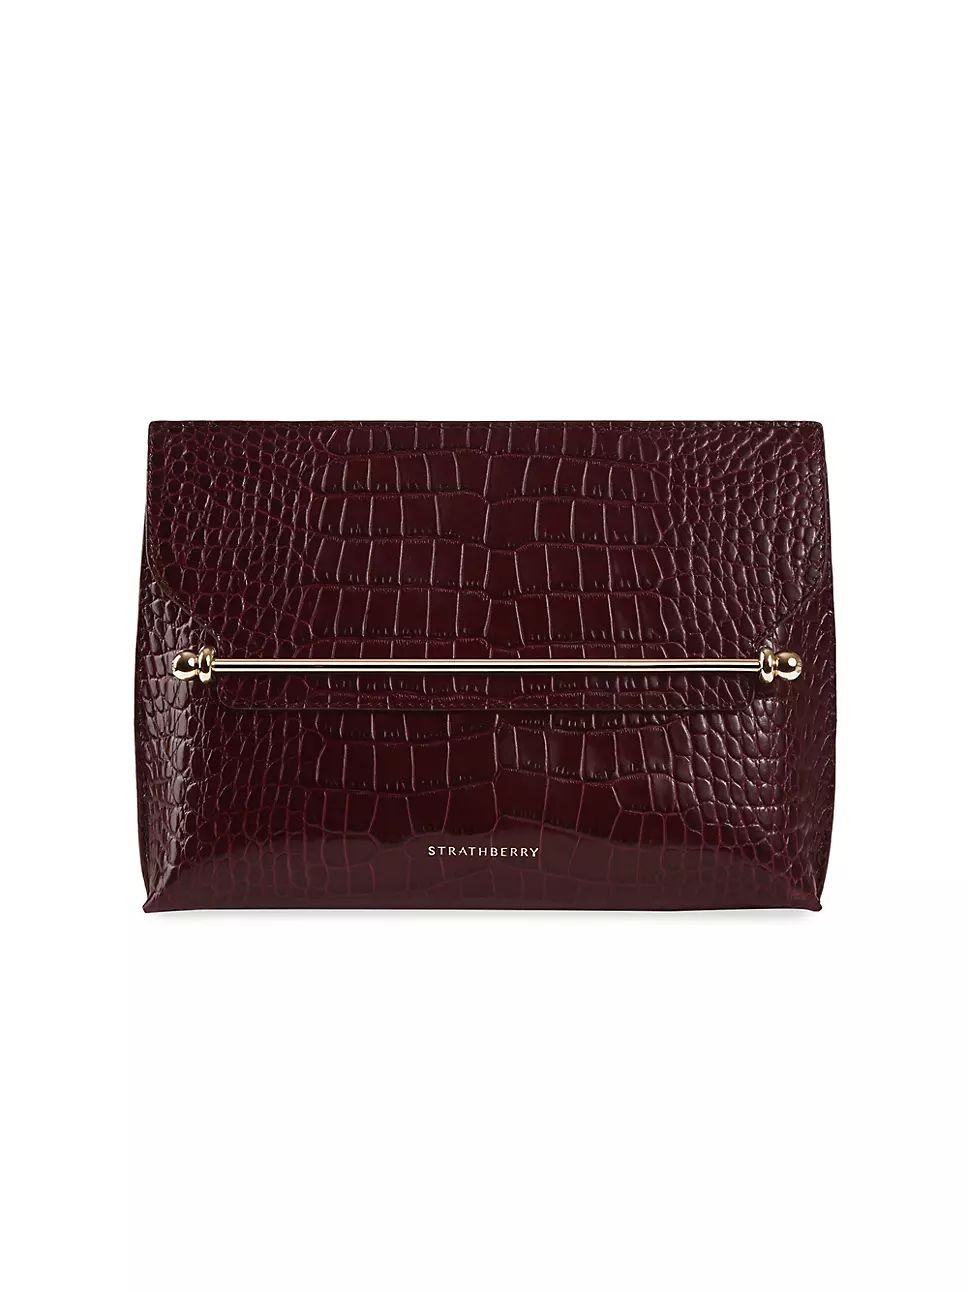 Stylist Croc-Embossed Leather Clutch-on-Chain | Saks Fifth Avenue